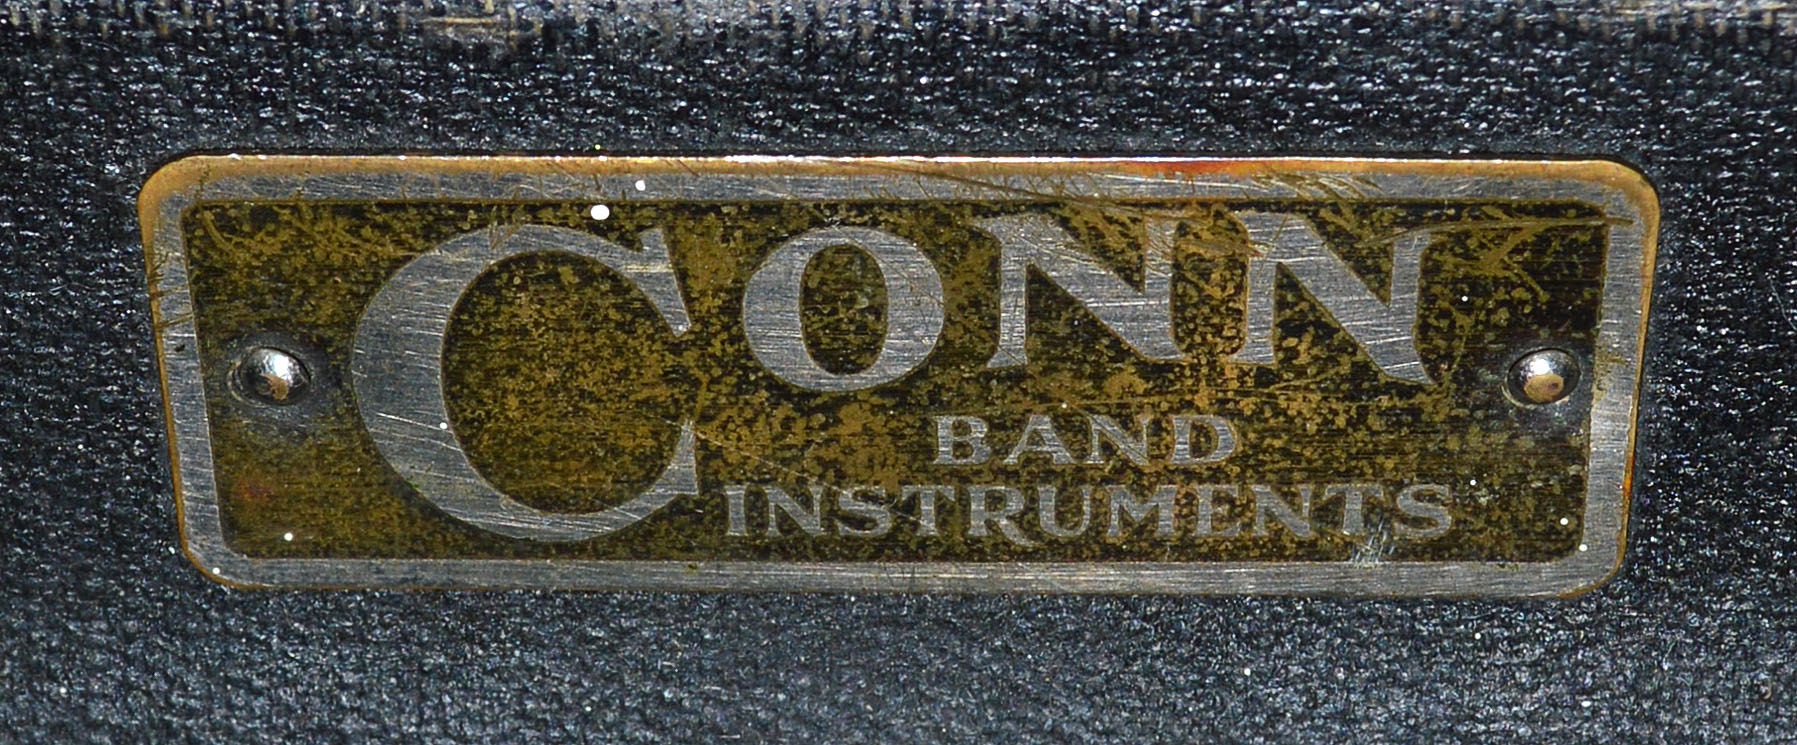 Conn trumpet serial number identification lookup